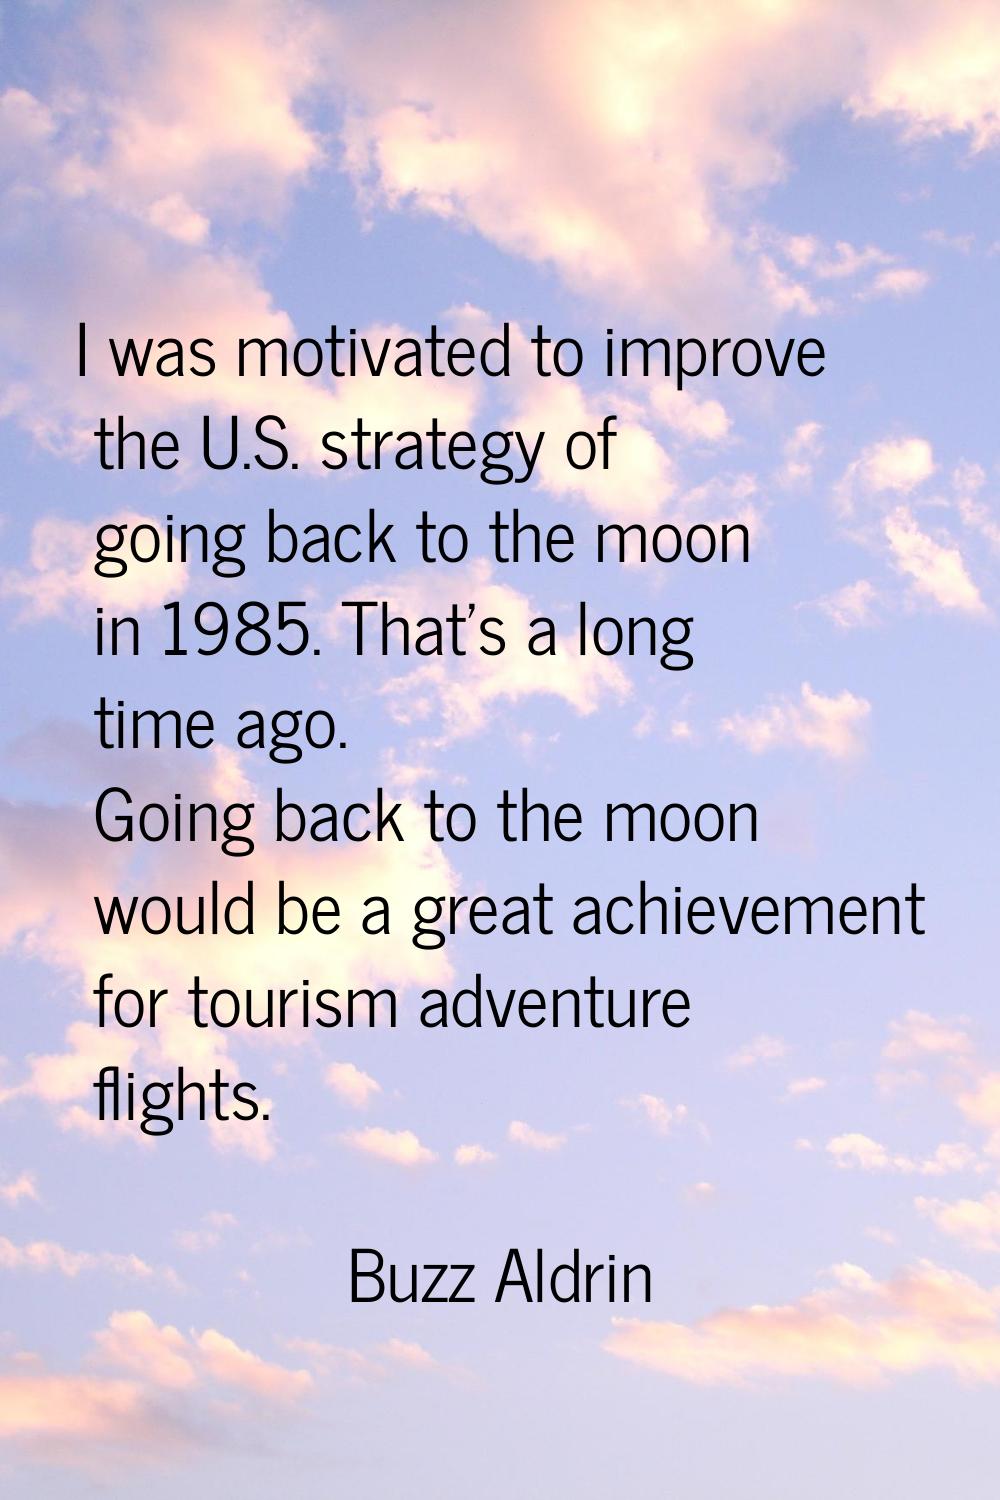 I was motivated to improve the U.S. strategy of going back to the moon in 1985. That's a long time 